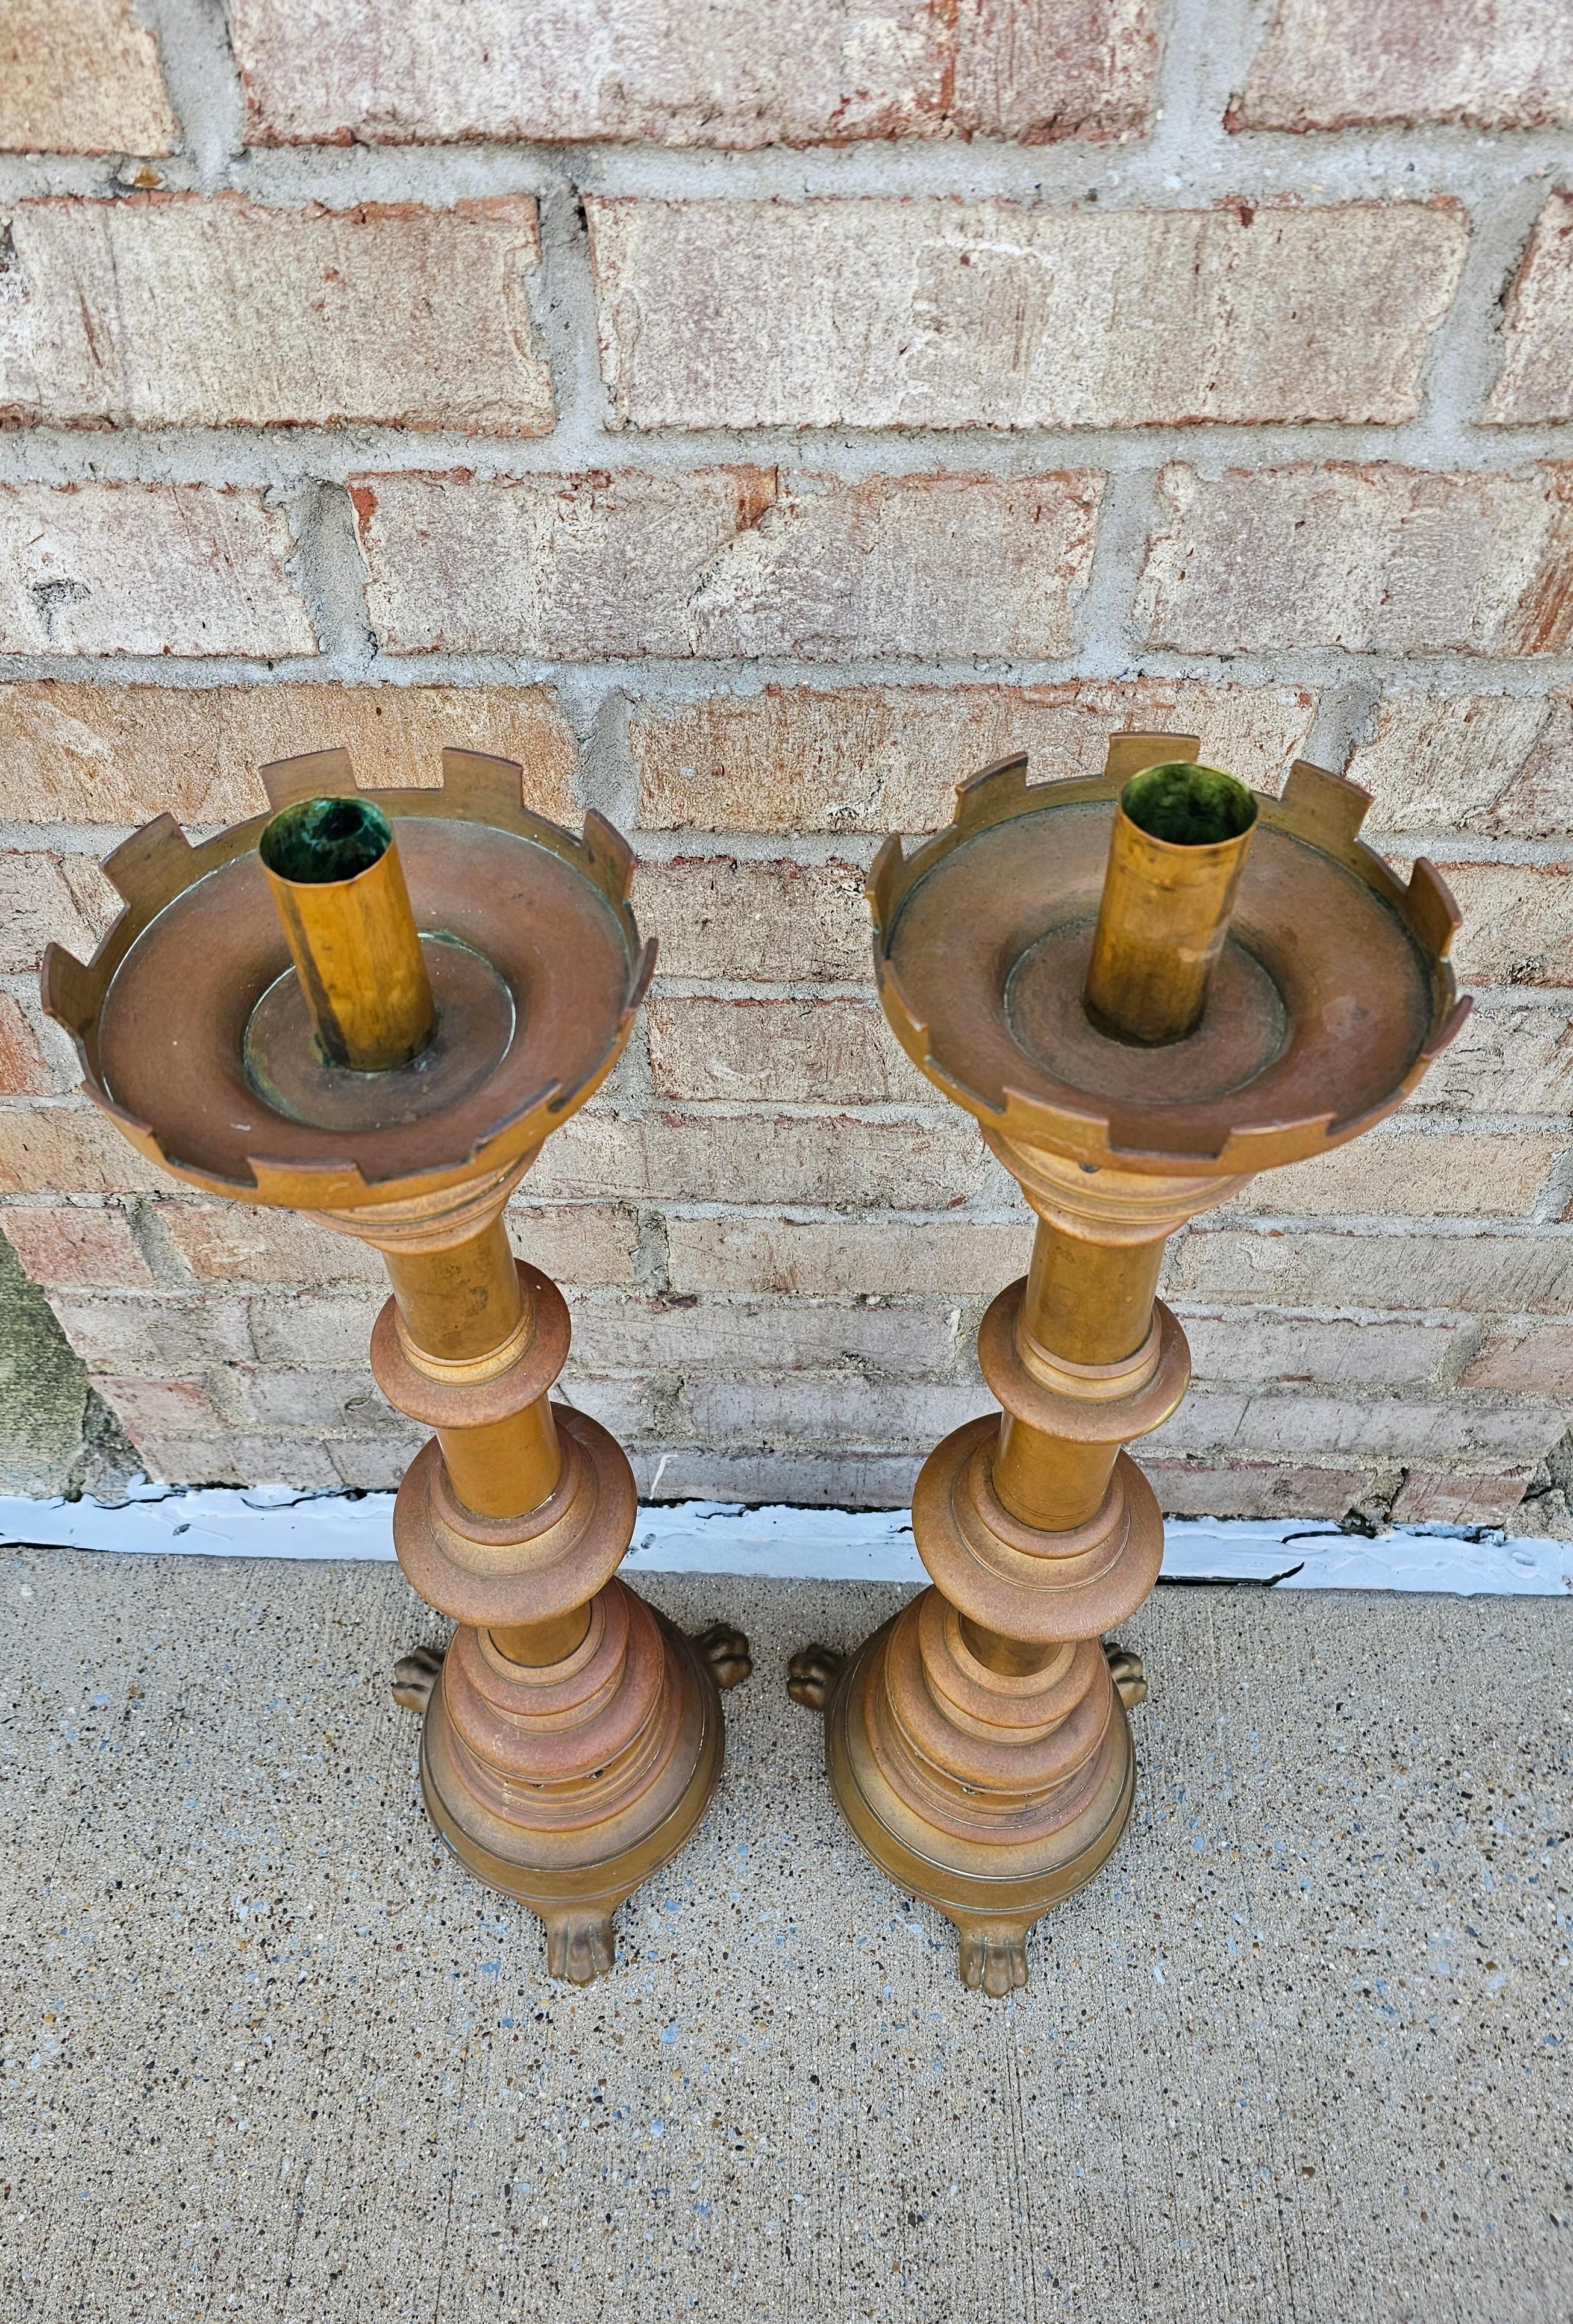 19th Century Gothic Revival Bronze Altar Candlestick Pair  In Good Condition For Sale In Forney, TX